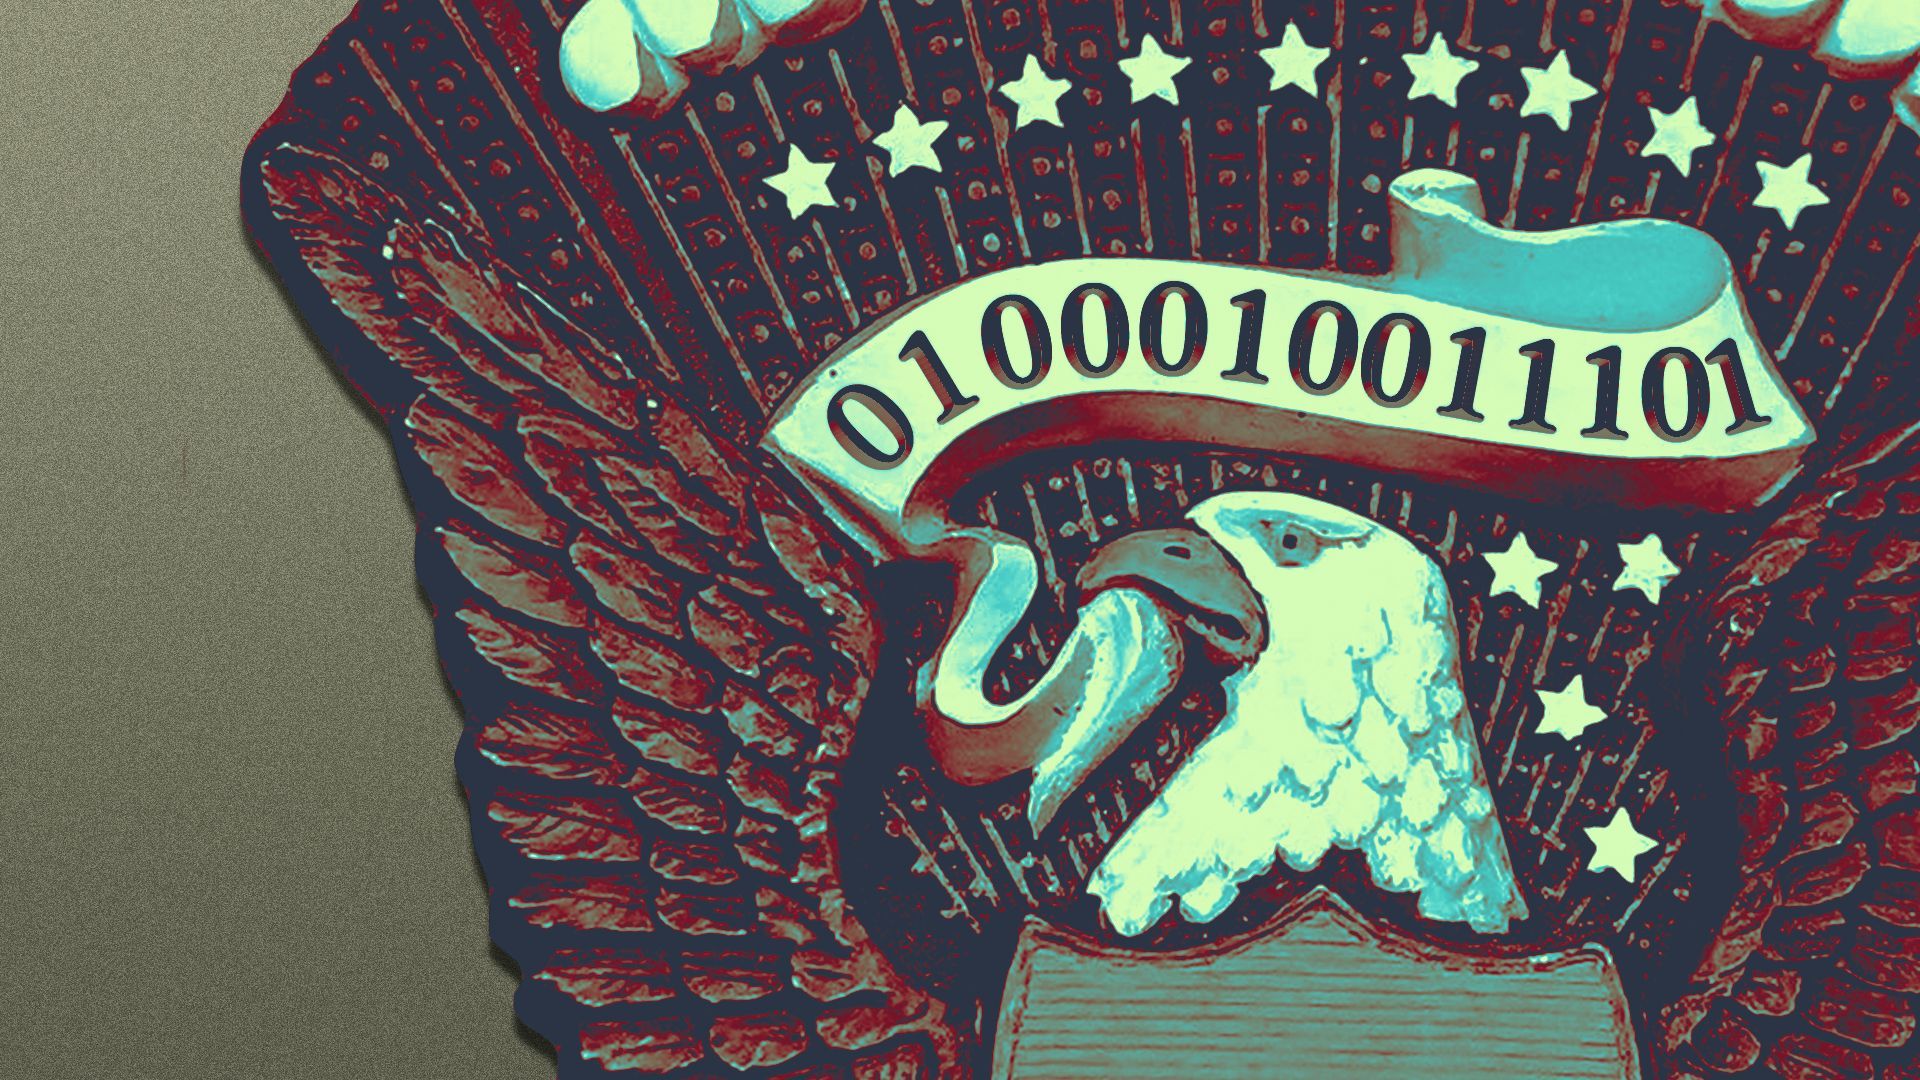 Illustration of the presidential seal with binary code on the banner in the eagle's beak.